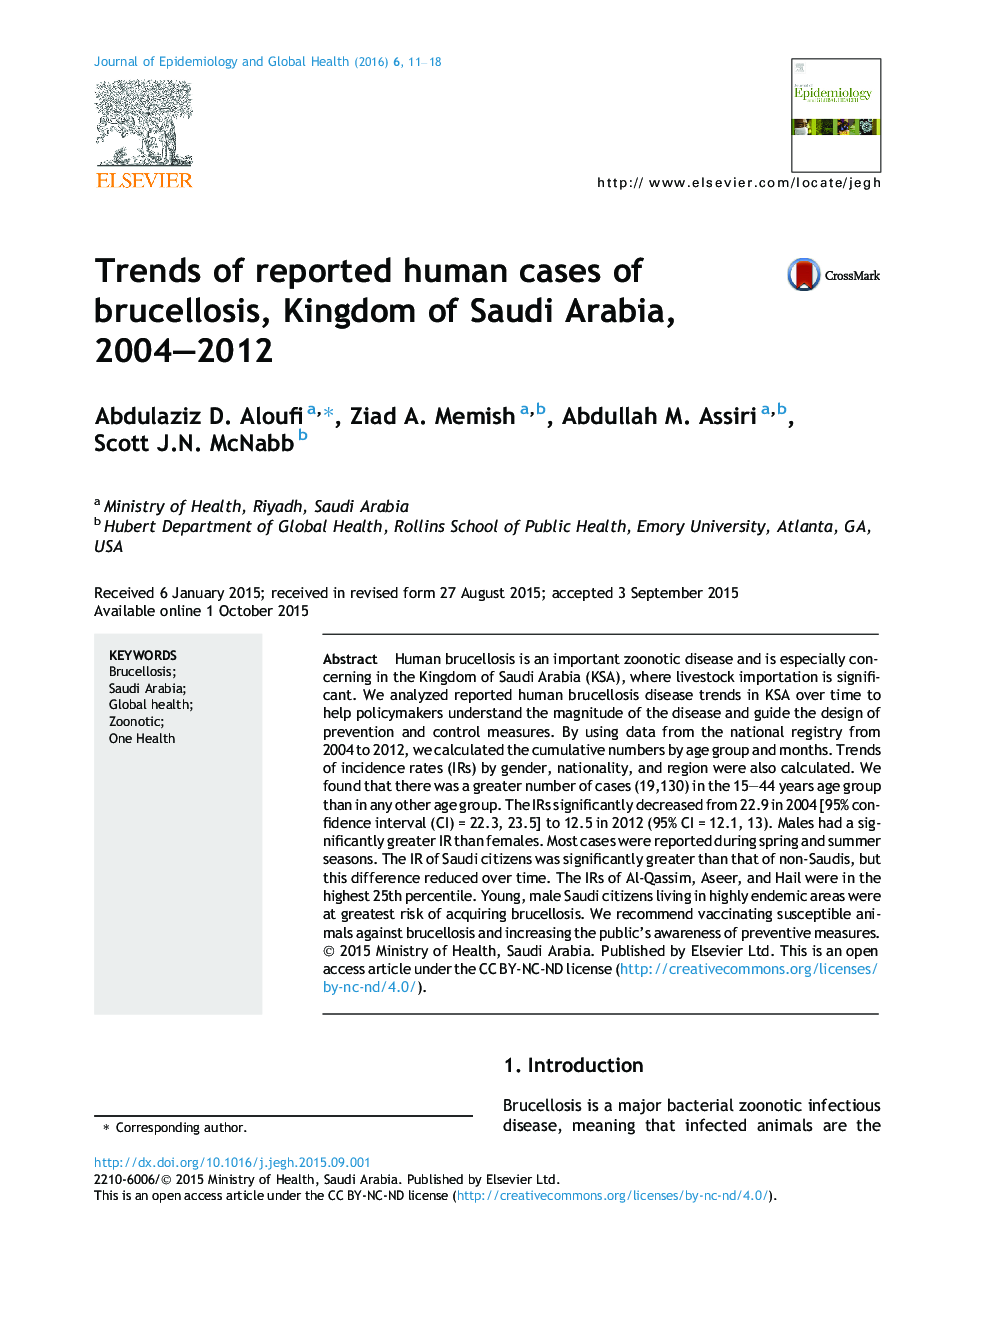 Trends of reported human cases of brucellosis, Kingdom of Saudi Arabia, 2004–2012